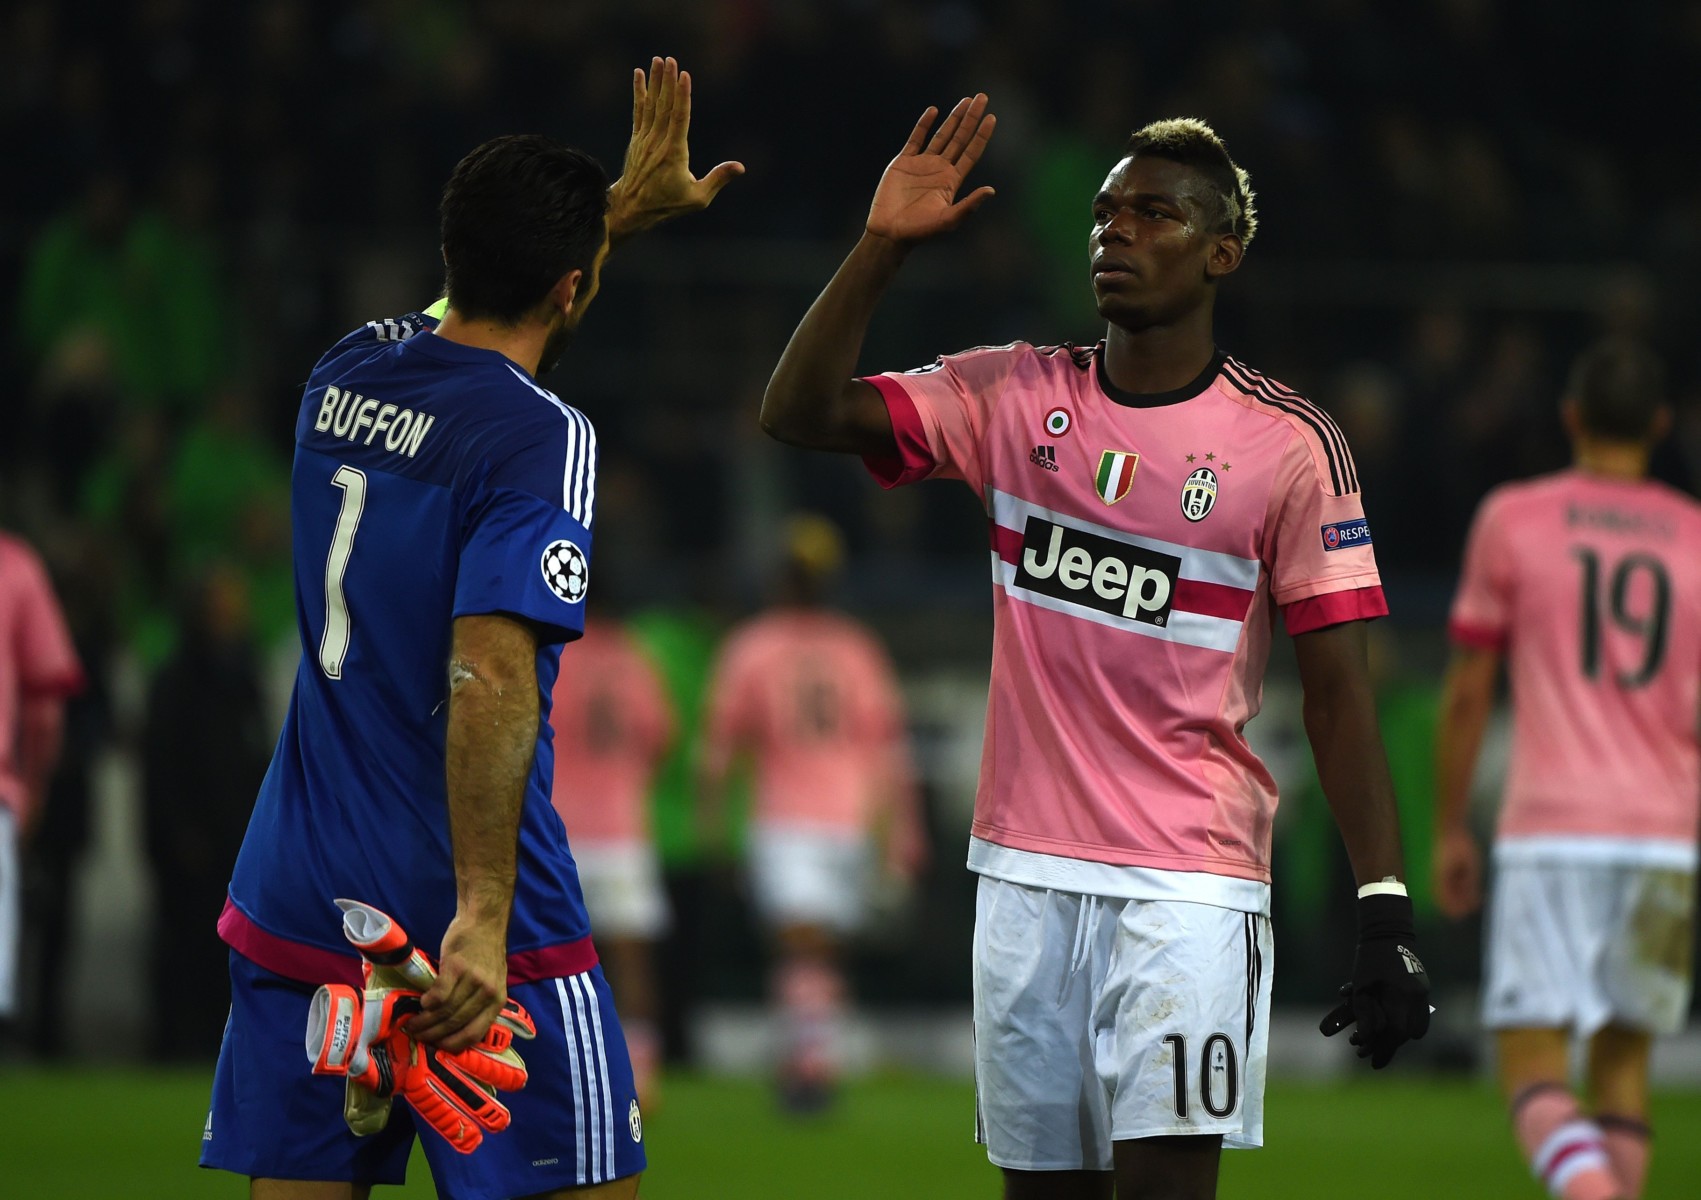 Pogba and Gianluigi Buffon played pivotal roles in Juventus' dominance throughout the Frenchman's four years in Turin